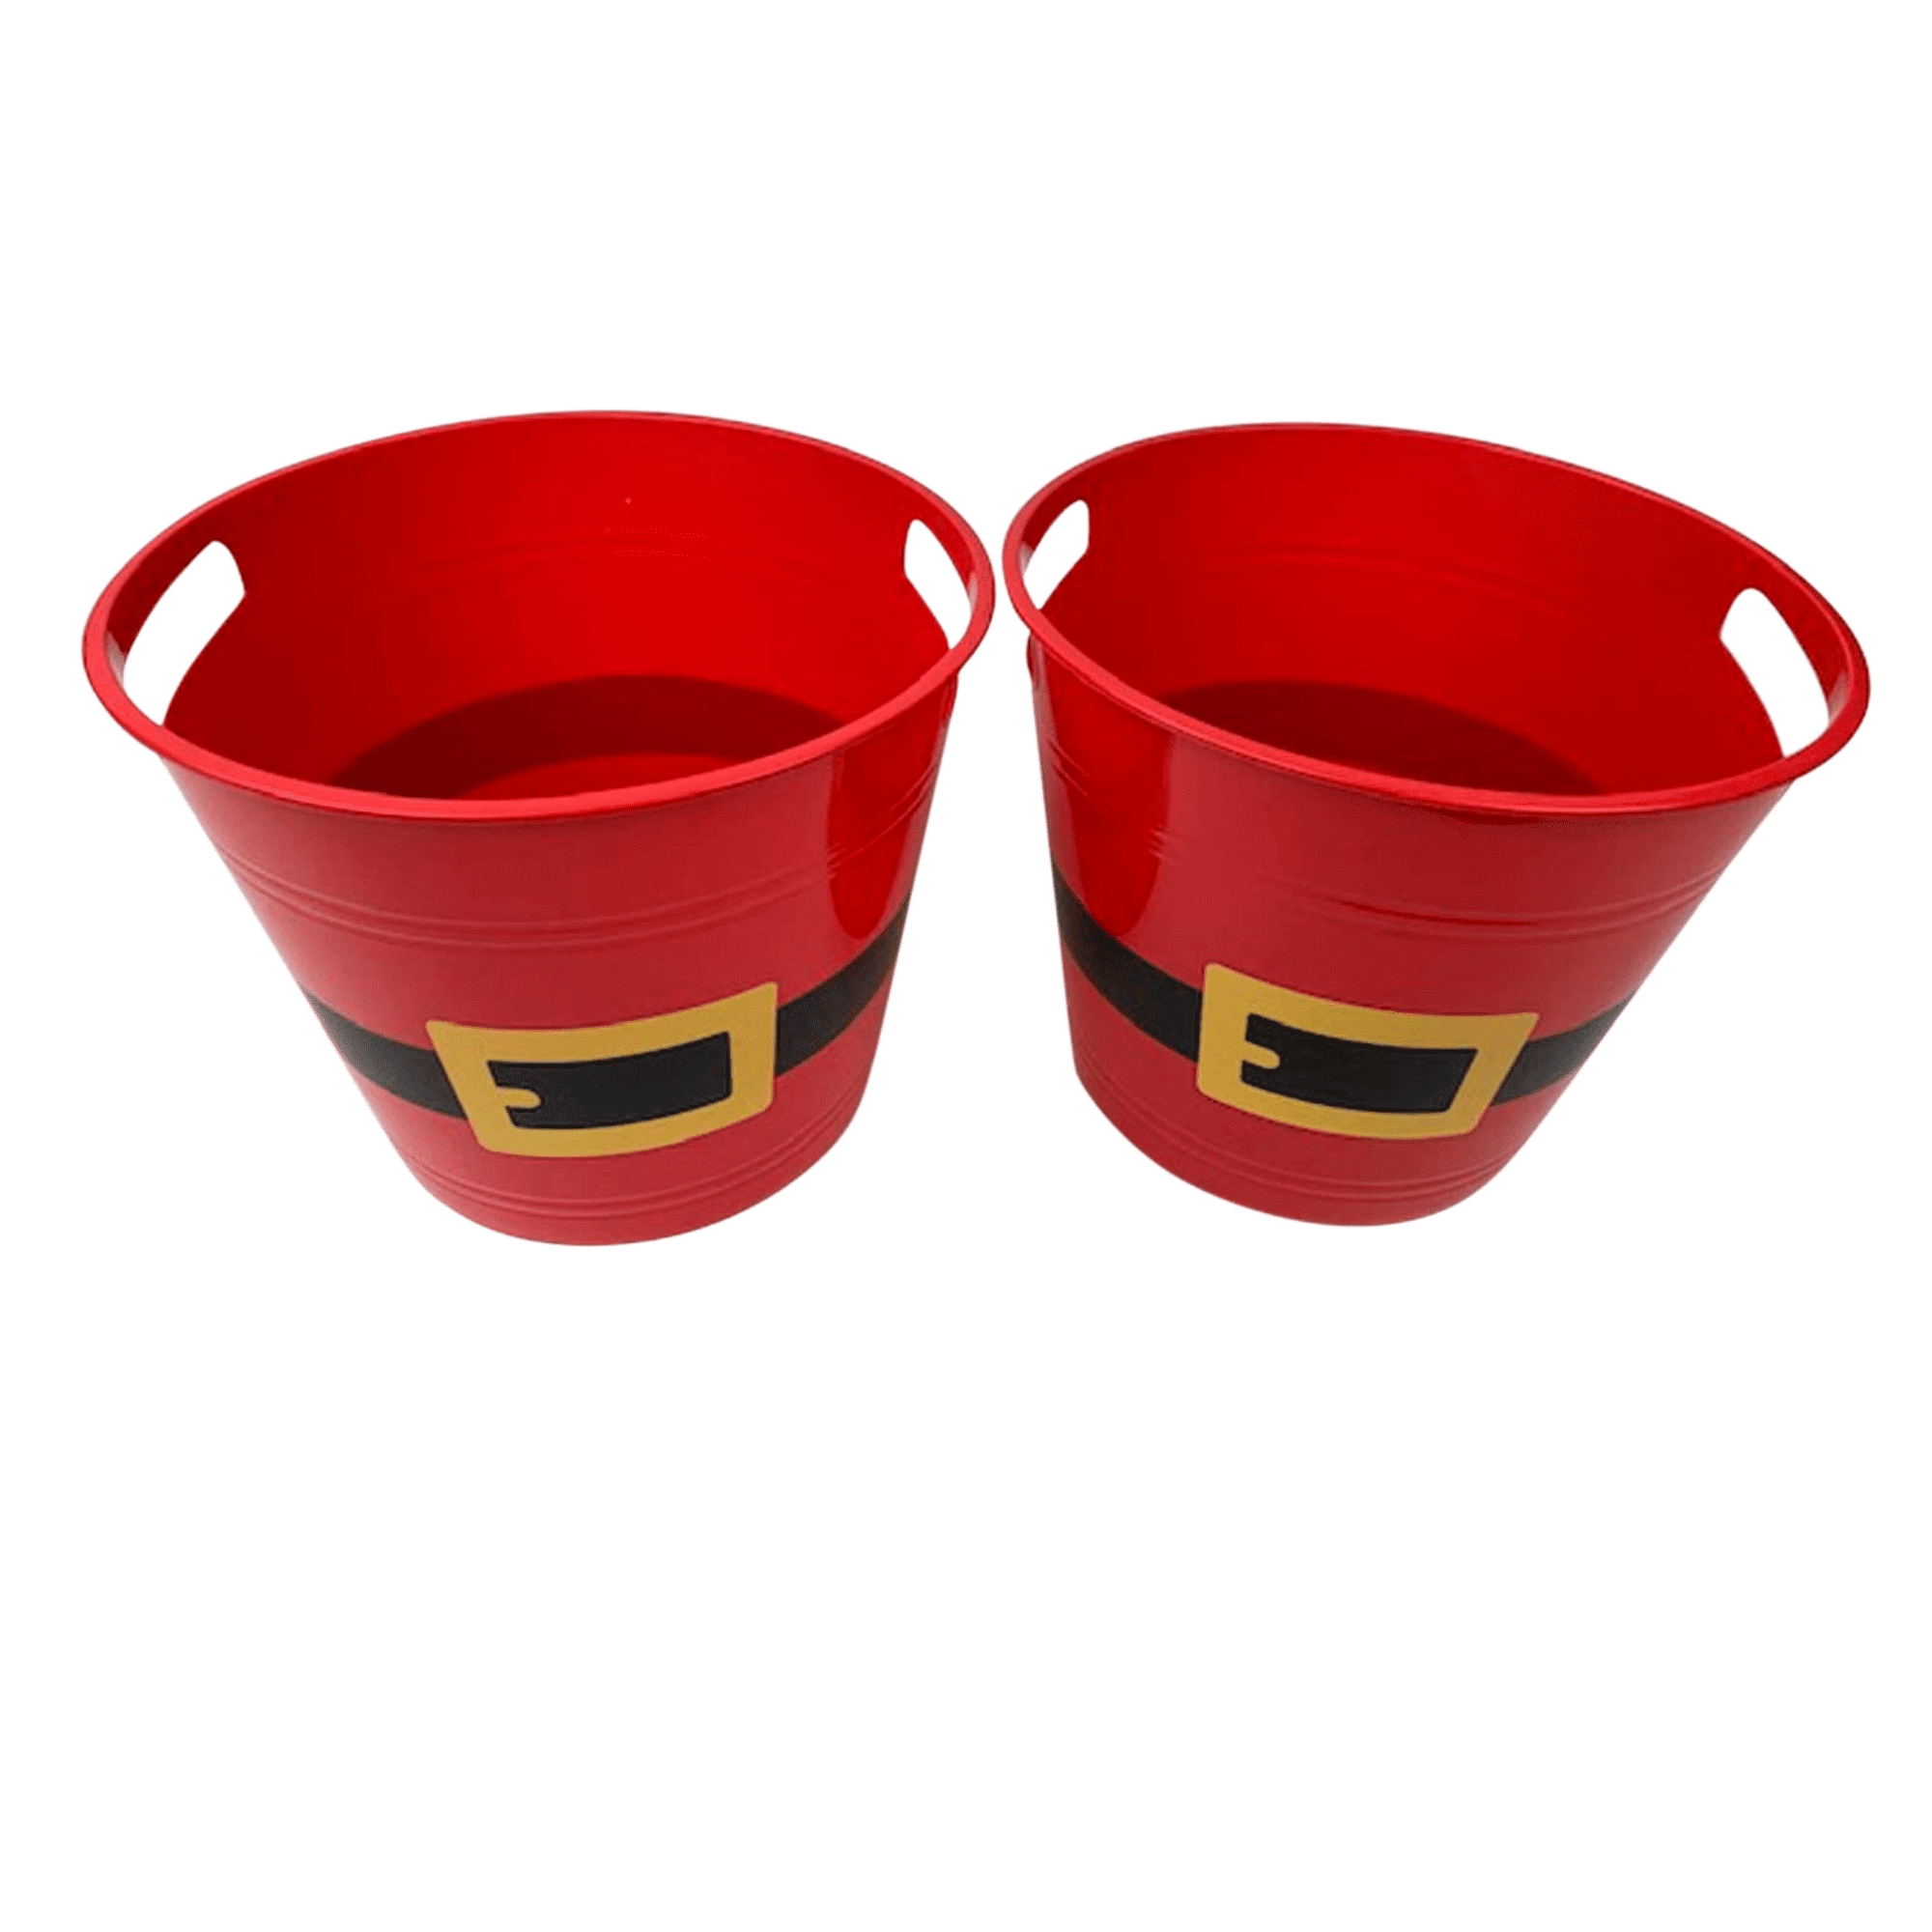 Ja'cor Plastic Buckets with Handles Red Santa Belt Round Basket, Multi-Purpose Container Decorative Kitchen Candy Baskets Christmas Classroom Holiday Party